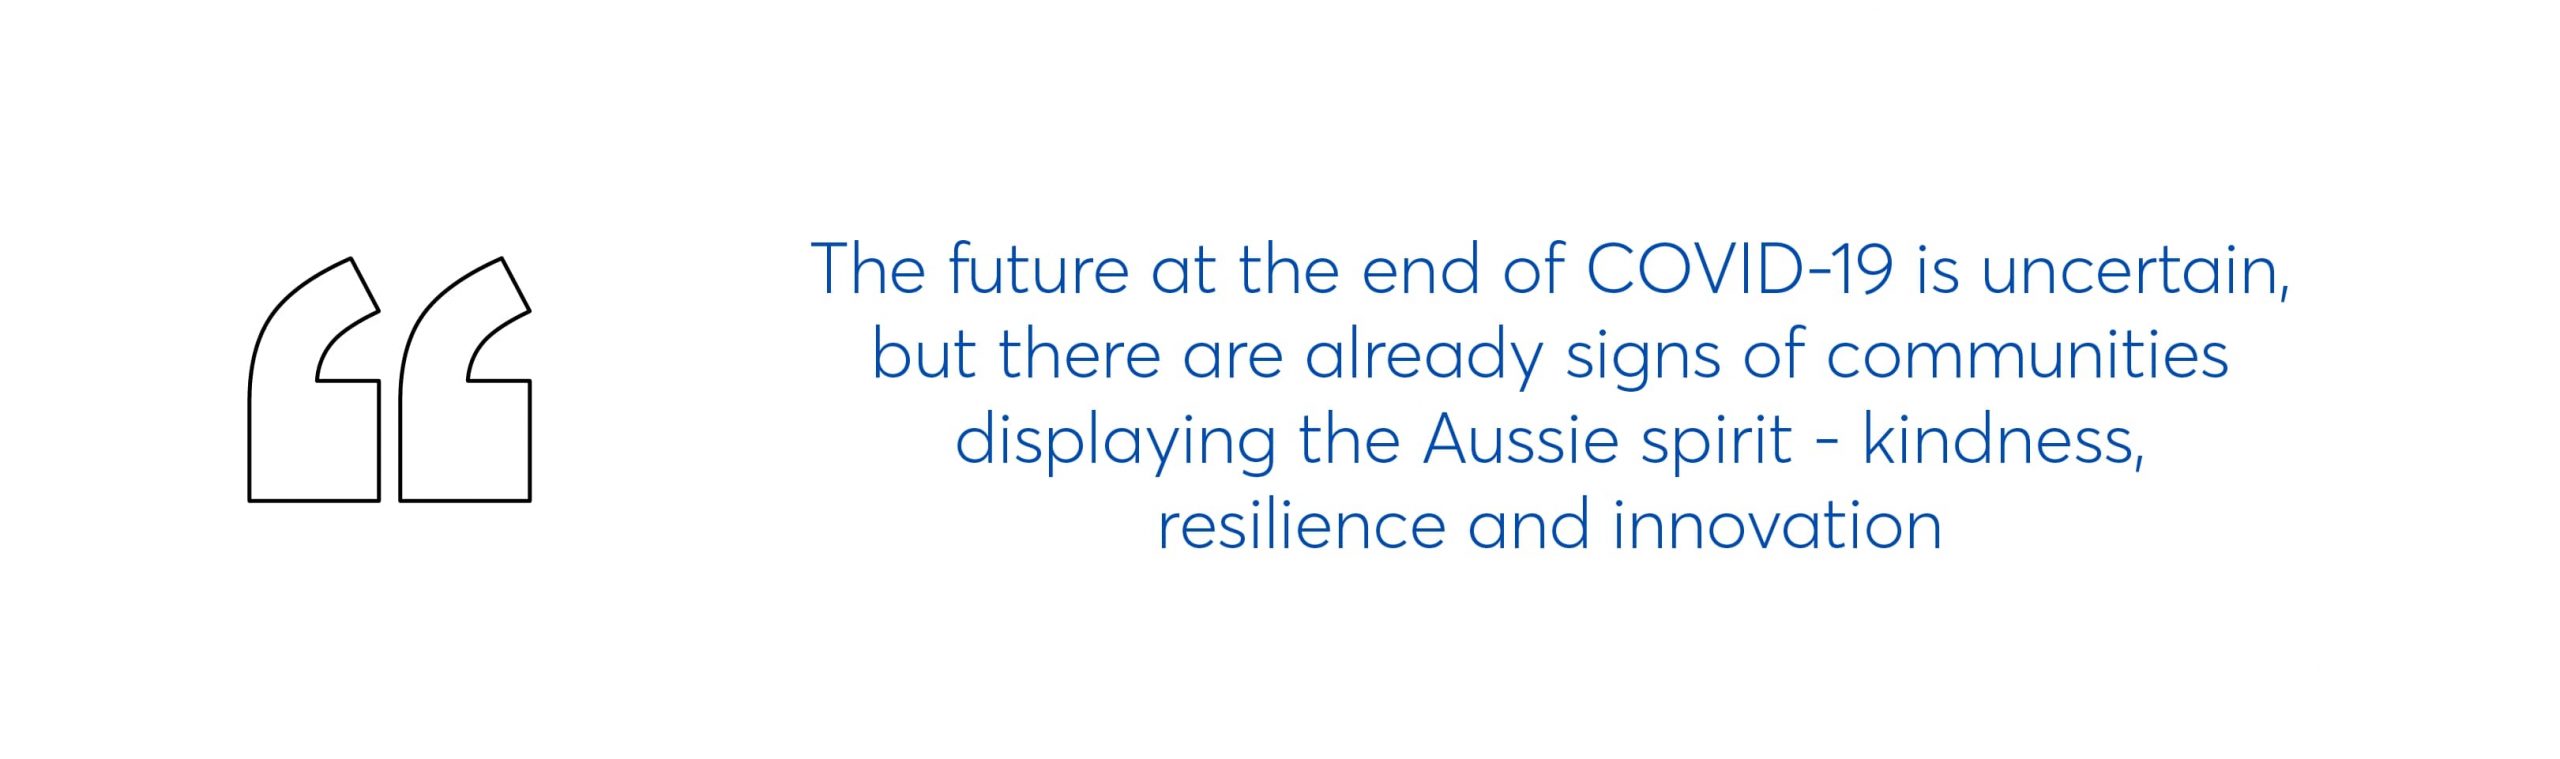 quote which says the future at the end of covid-19 is uncertain, but there are already signs of communities displaying the Aussie spirit - kindness, resilience and innovation